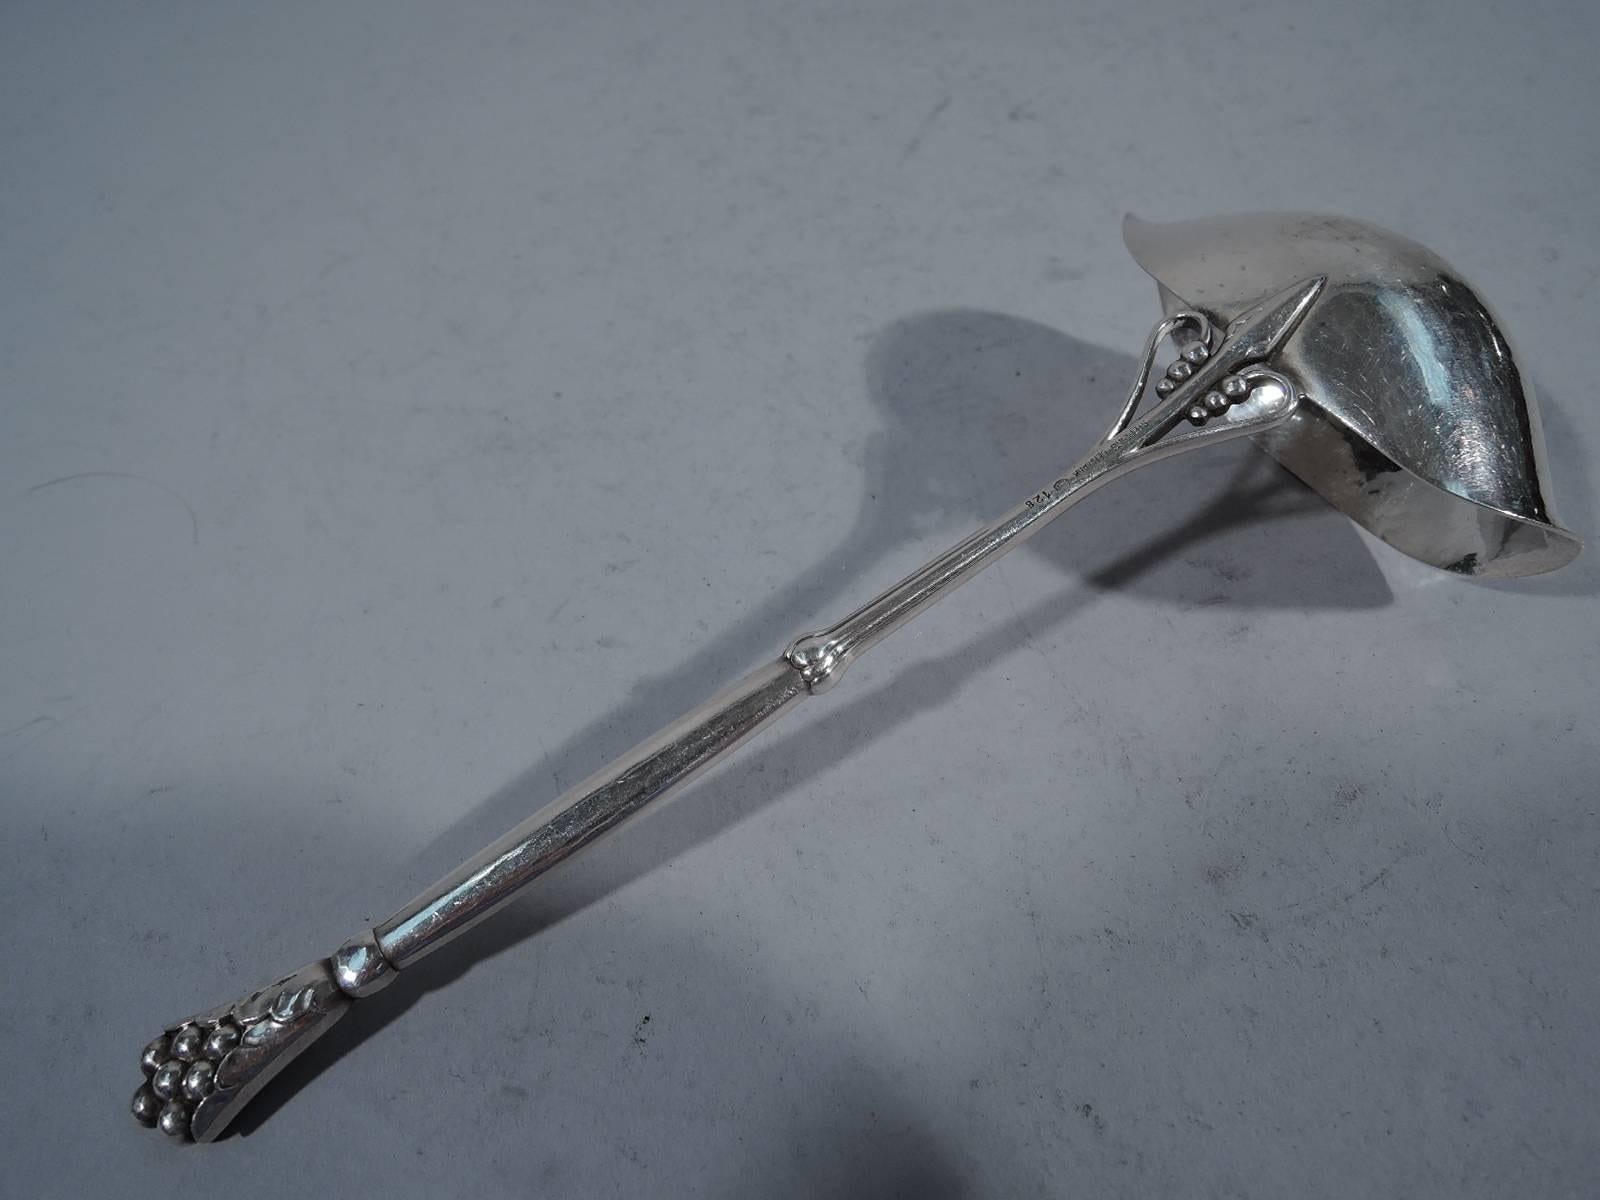 Sterling silver ladle in pattern no. 128. Made by Georg Jensen in Copenhagen. Bowl is “squashed” ovoid with two spouts and is mounted to handle with seeded scrolls. Handle terminal is leaf-wrapped berry. Visible hand hammering. This model is